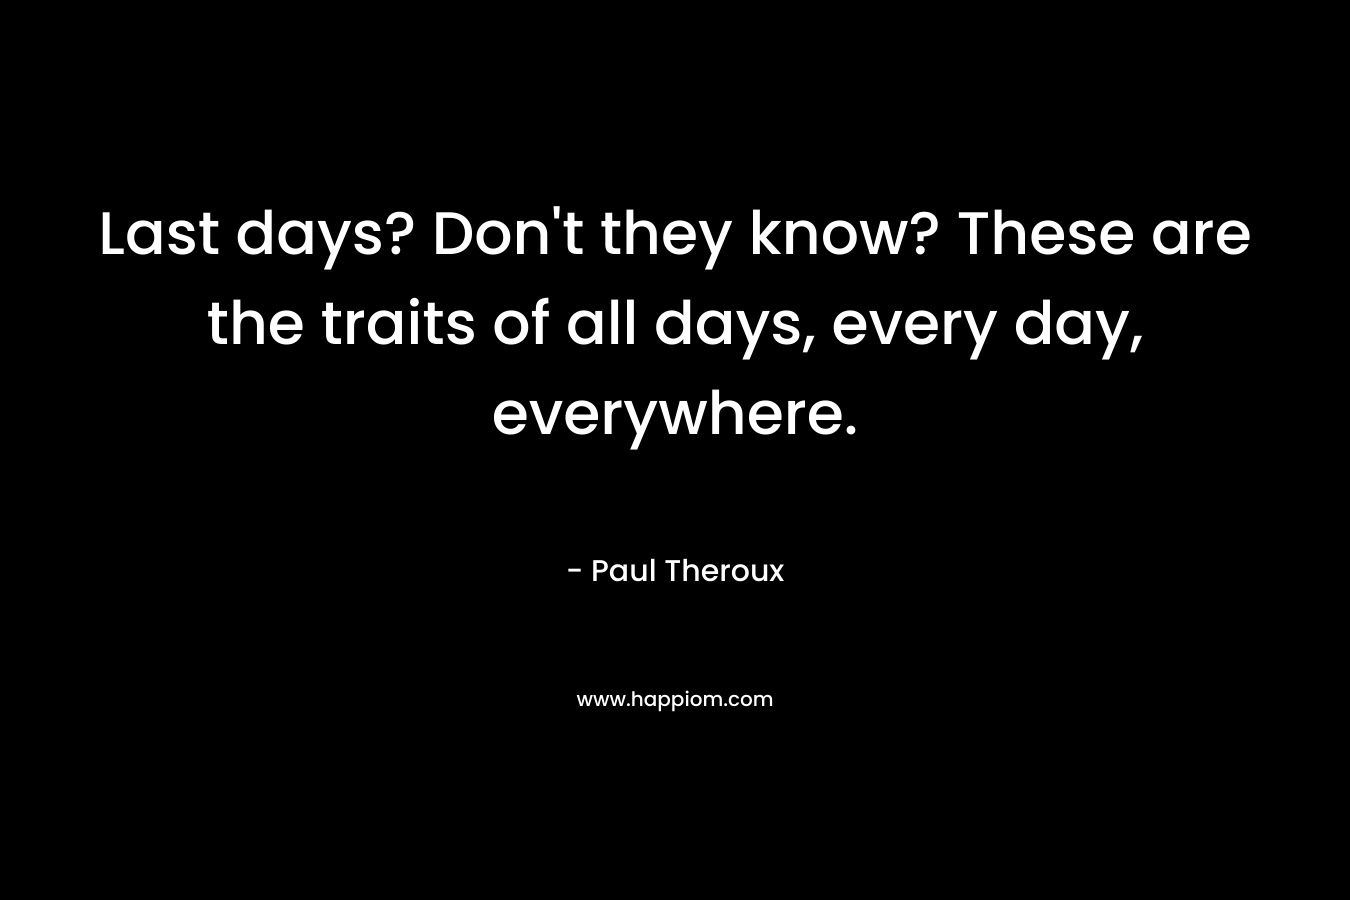 Last days? Don’t they know? These are the traits of all days, every day, everywhere. – Paul Theroux